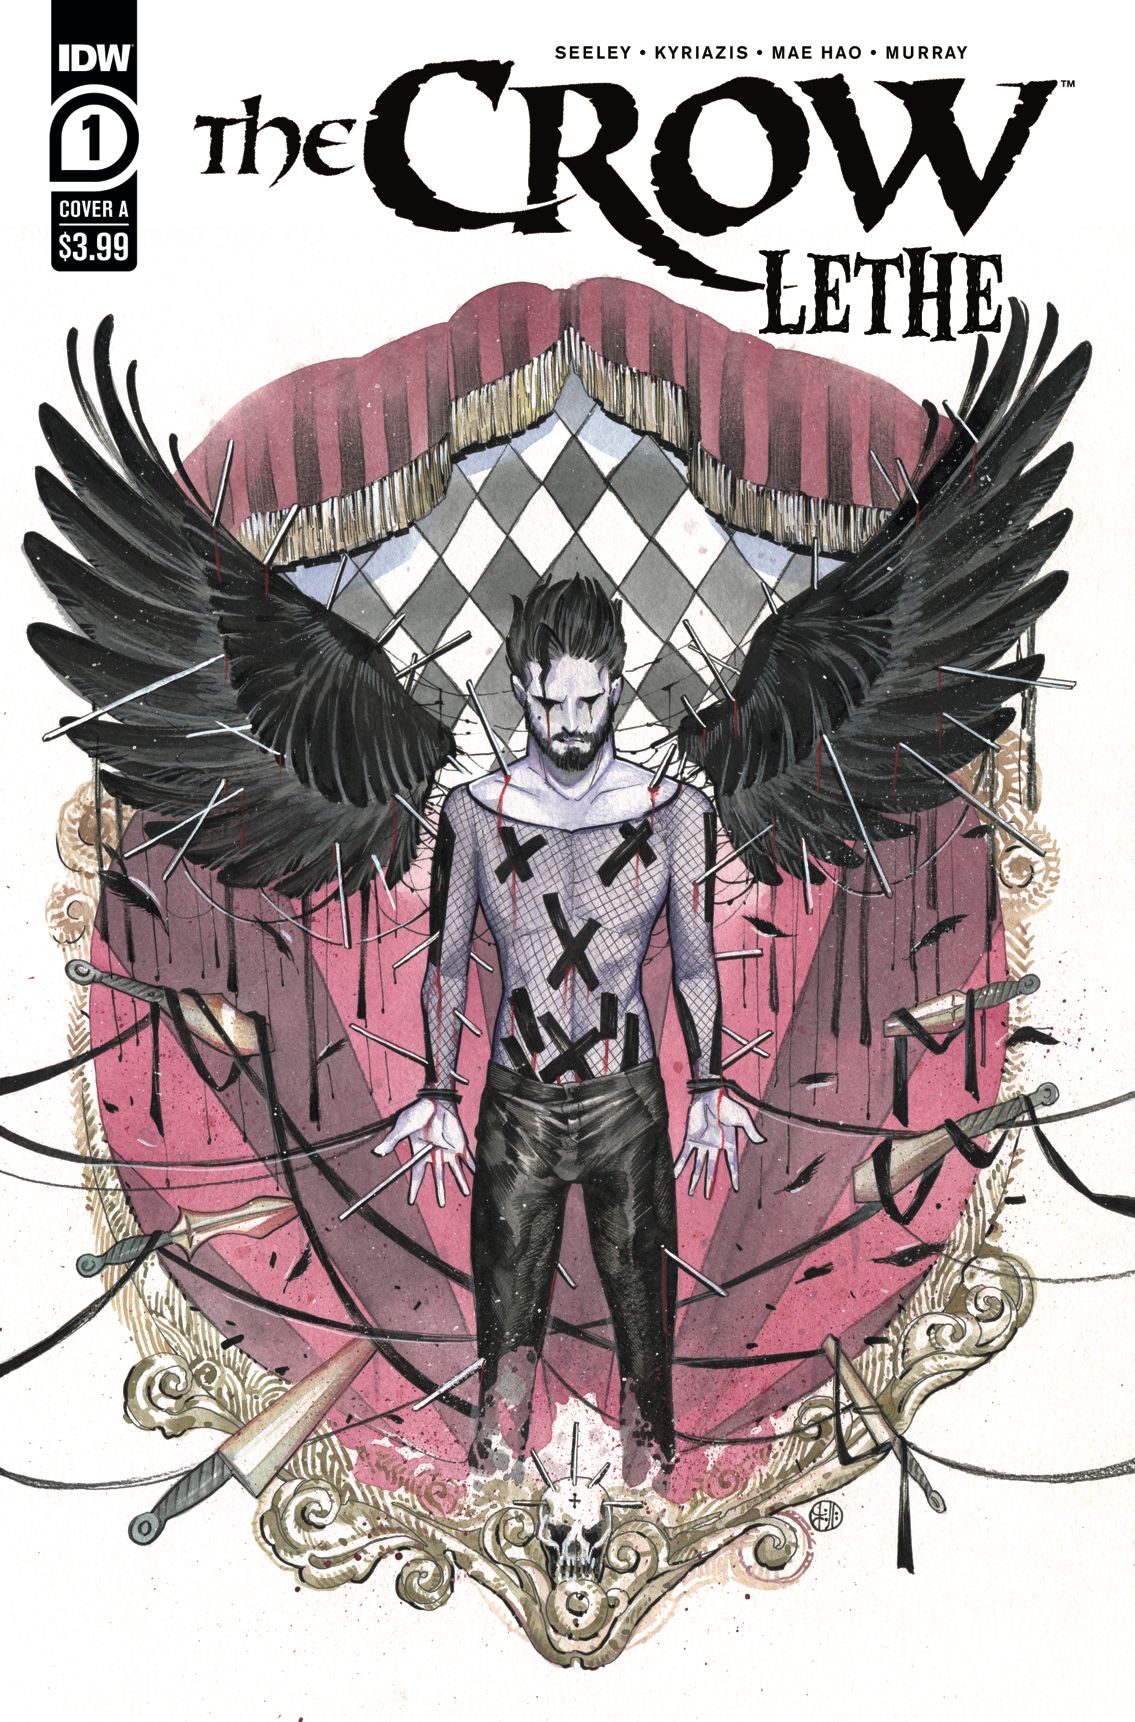 The Crow: Lethe #1 | IDW Publishing